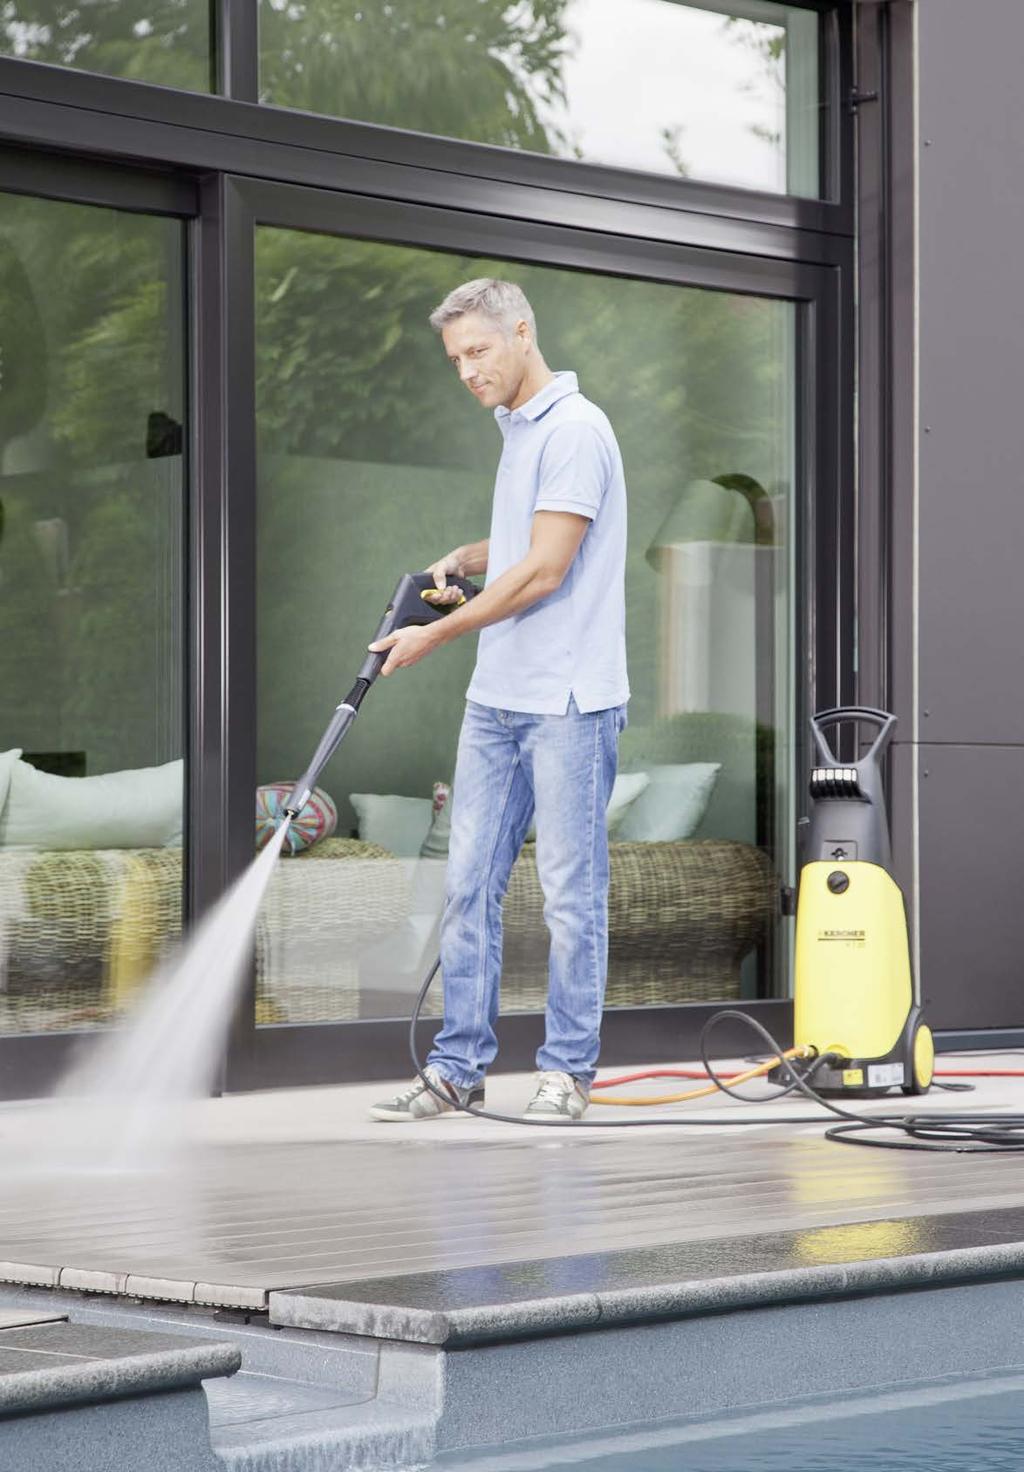 High-pressure cleaning lines Our comprehensive